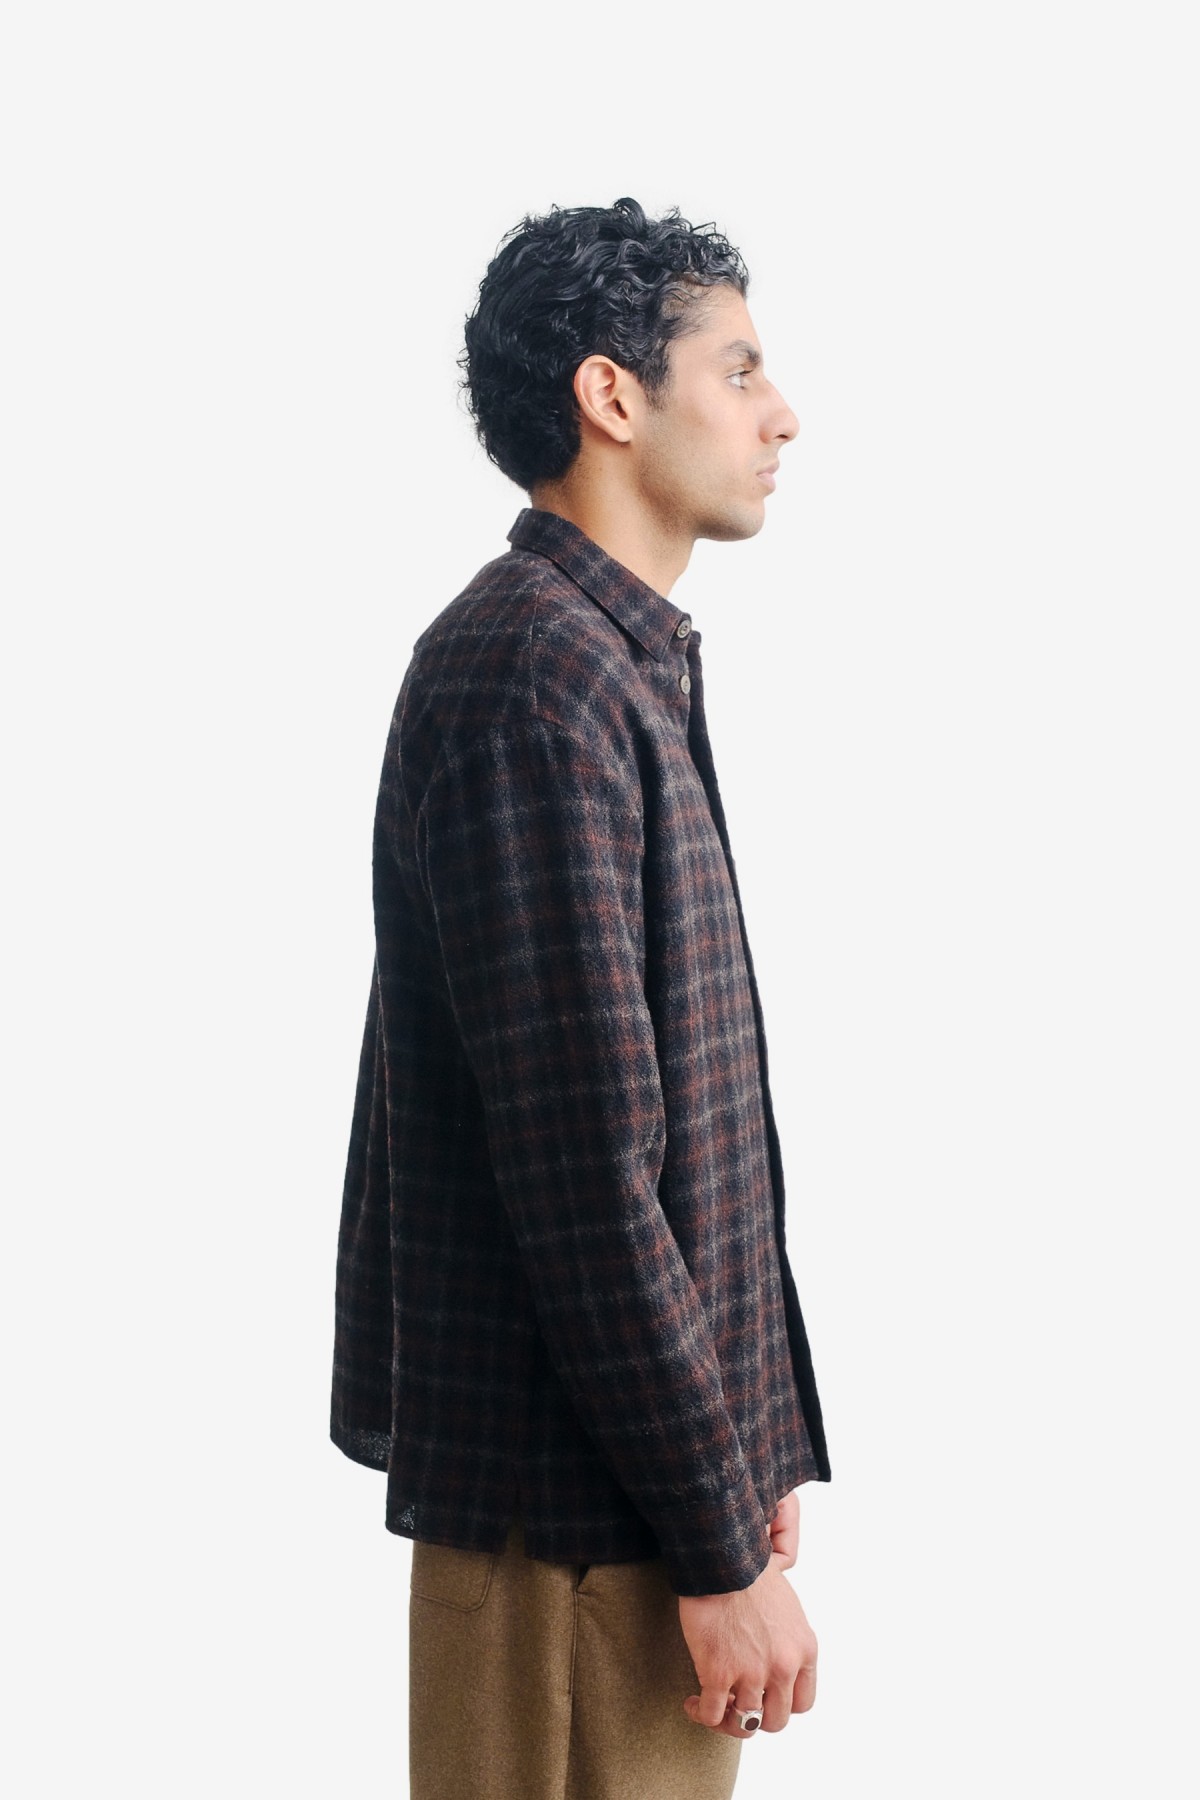 A Kind of Guise Gusto Shirt in Chocolate Check